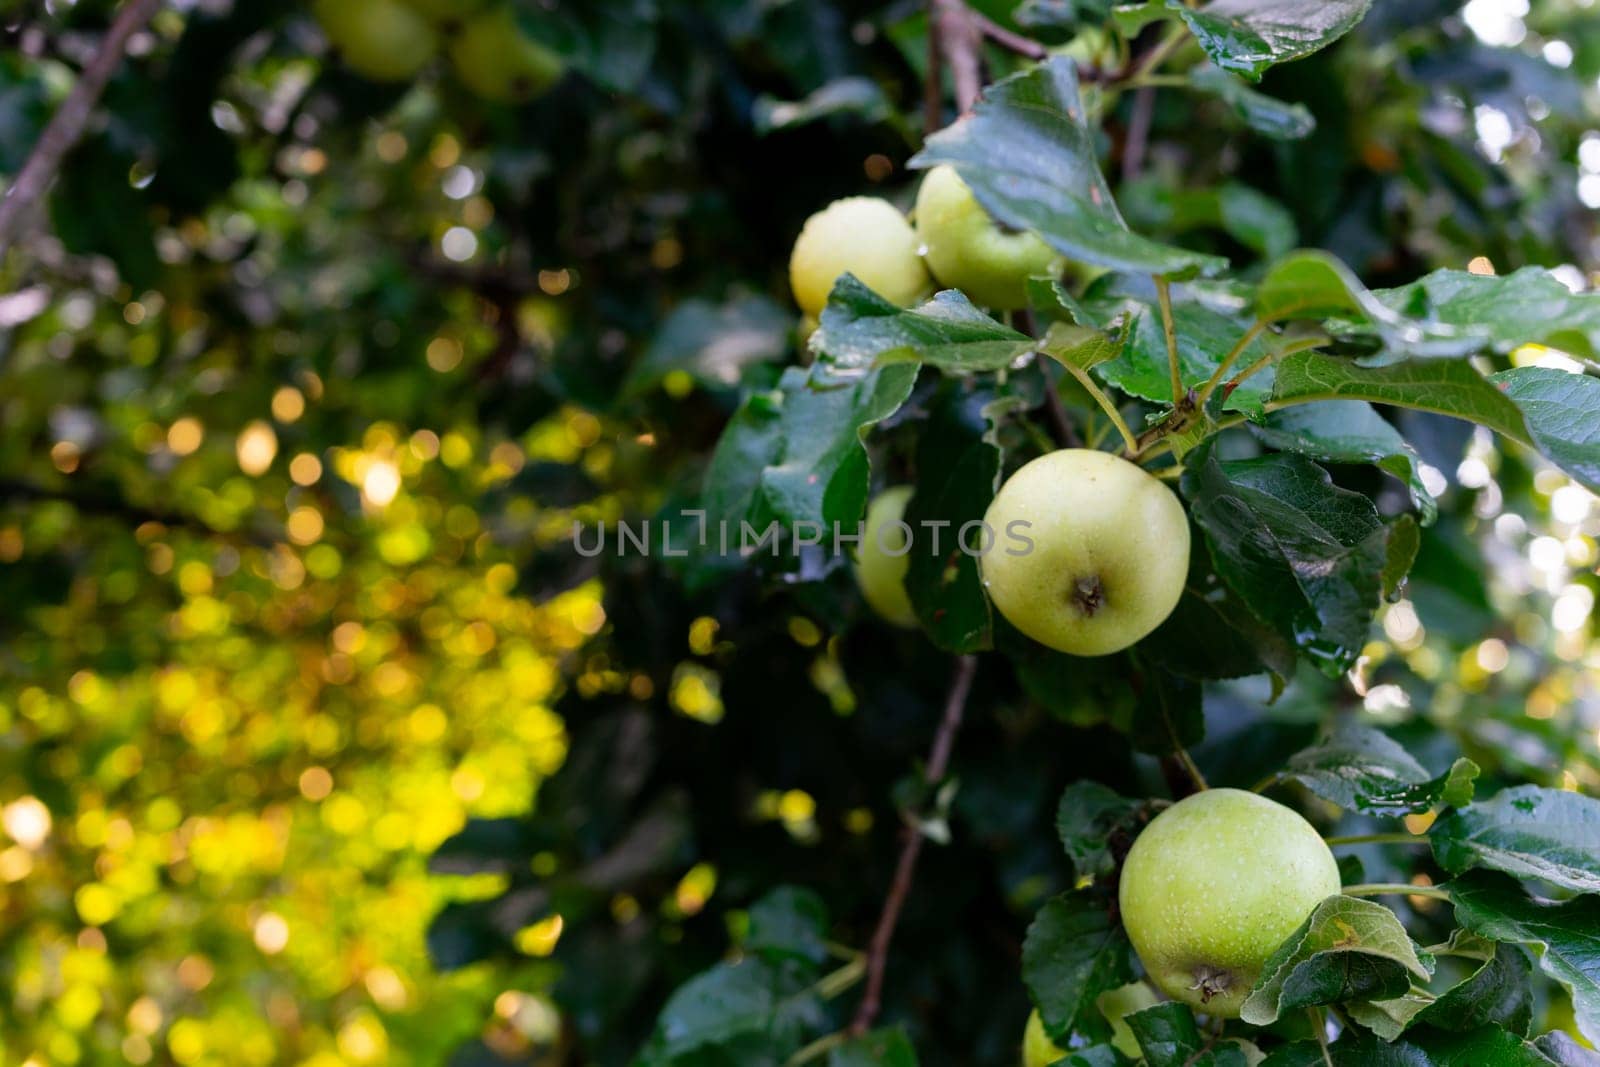 An apple tree after the rain. Green wet apples on a branch.